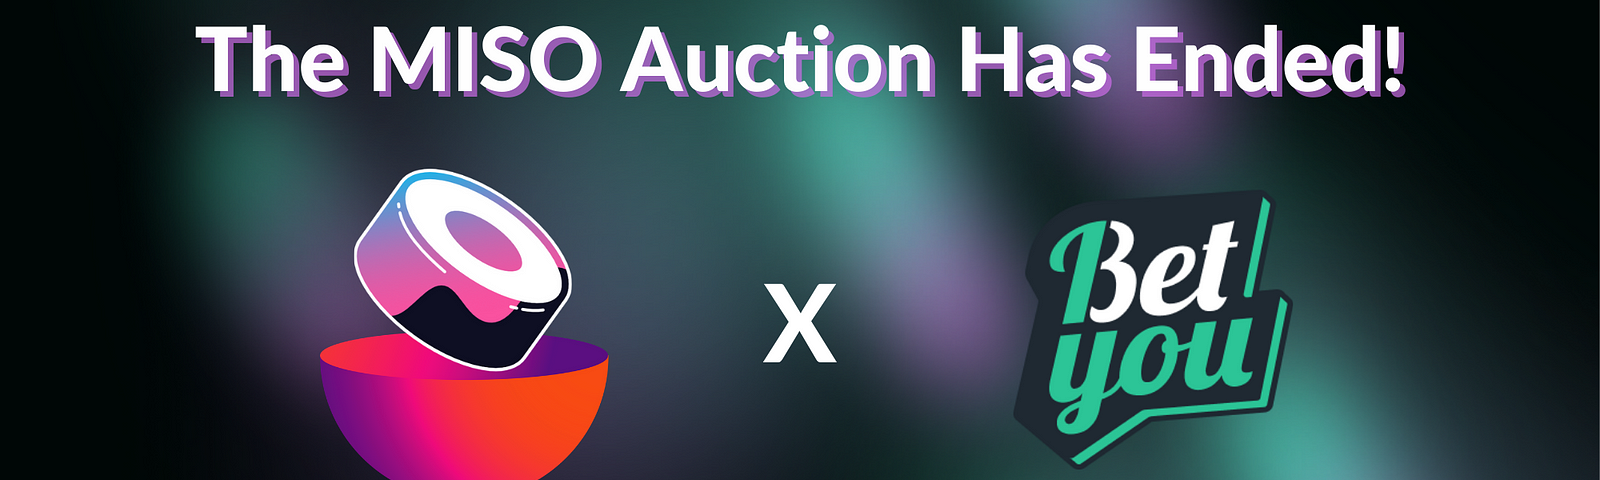 The MISO auction has ended!